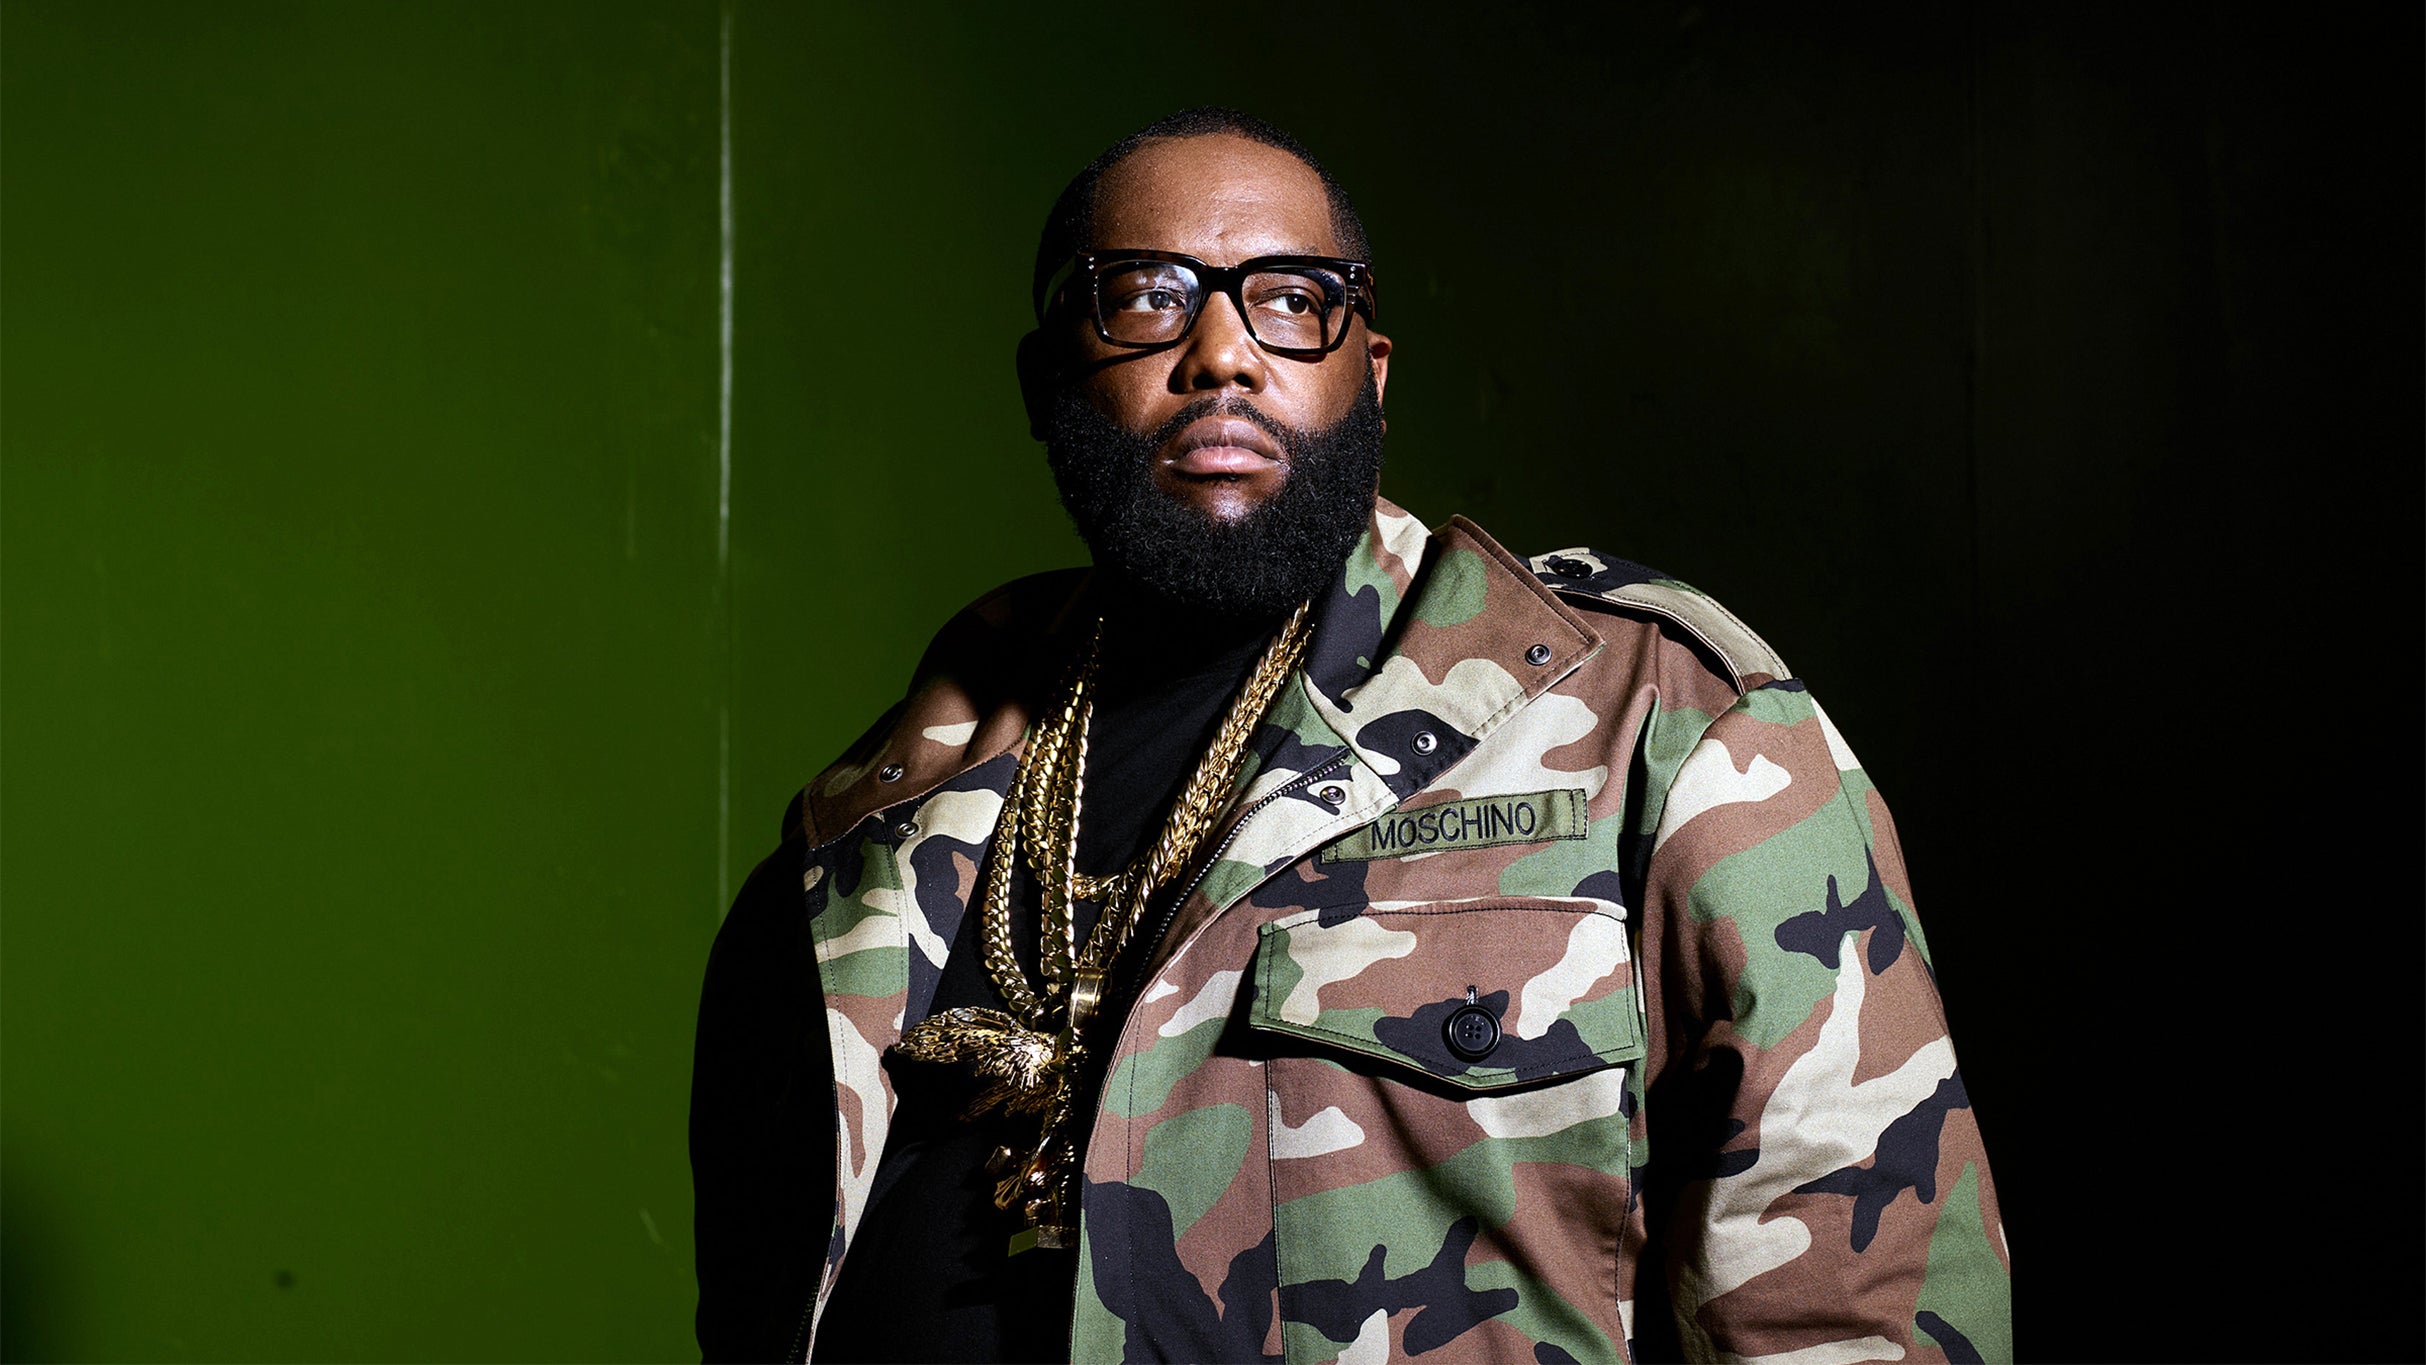 Killer Mike and the Midnight Revival: The High & Holy Tour in San Francisco promo photo for Spotify presale offer code